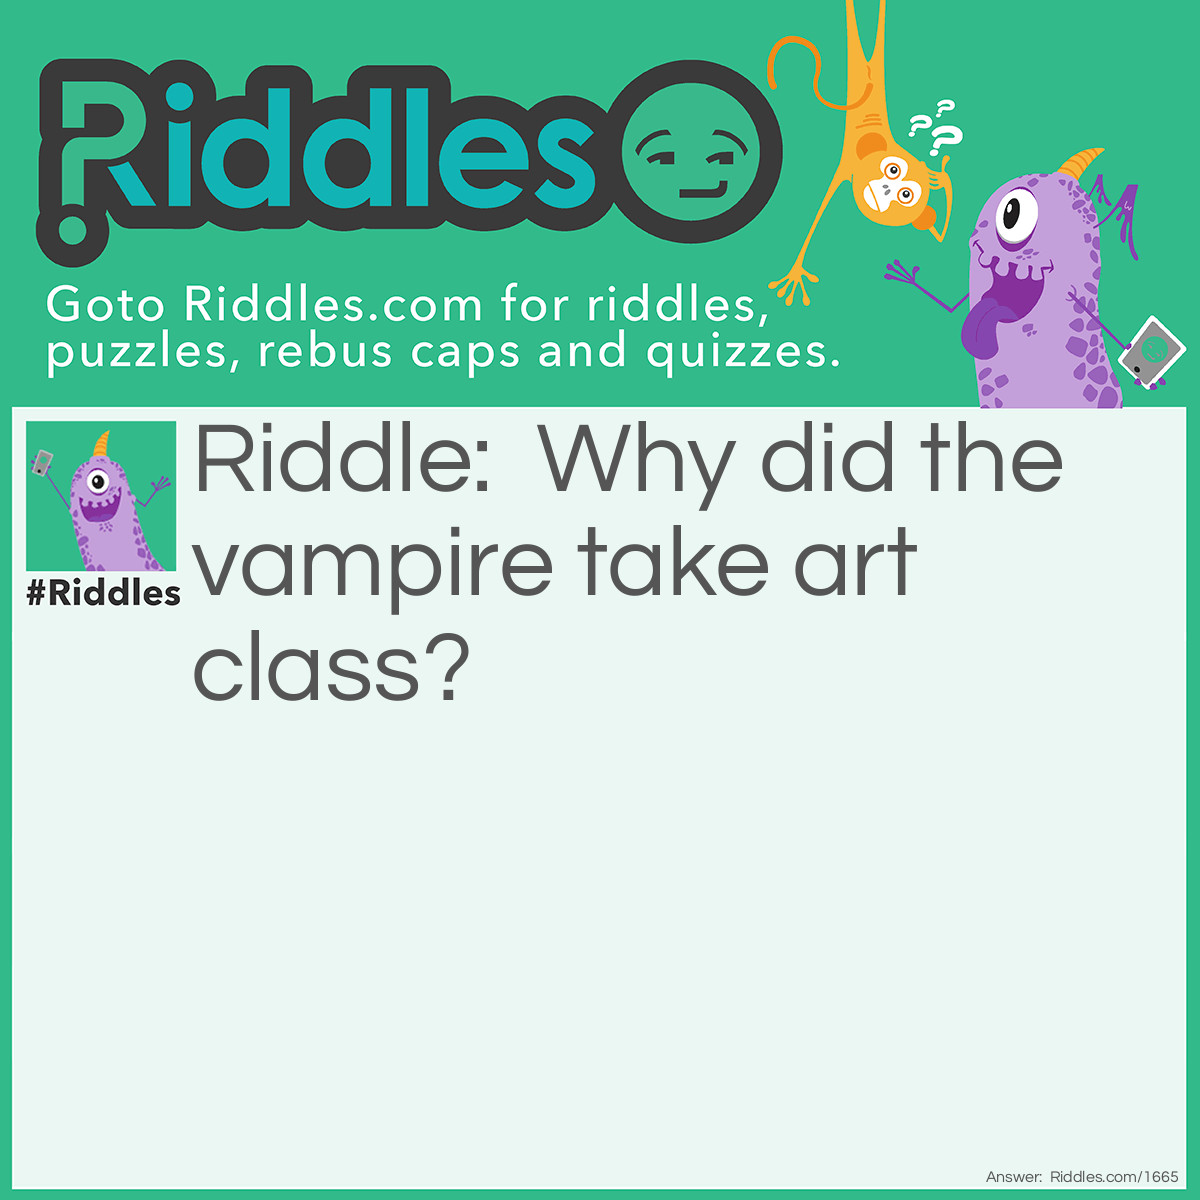 Riddle: Why did the vampire take art class? Answer: He wanted to learn how to draw blood.